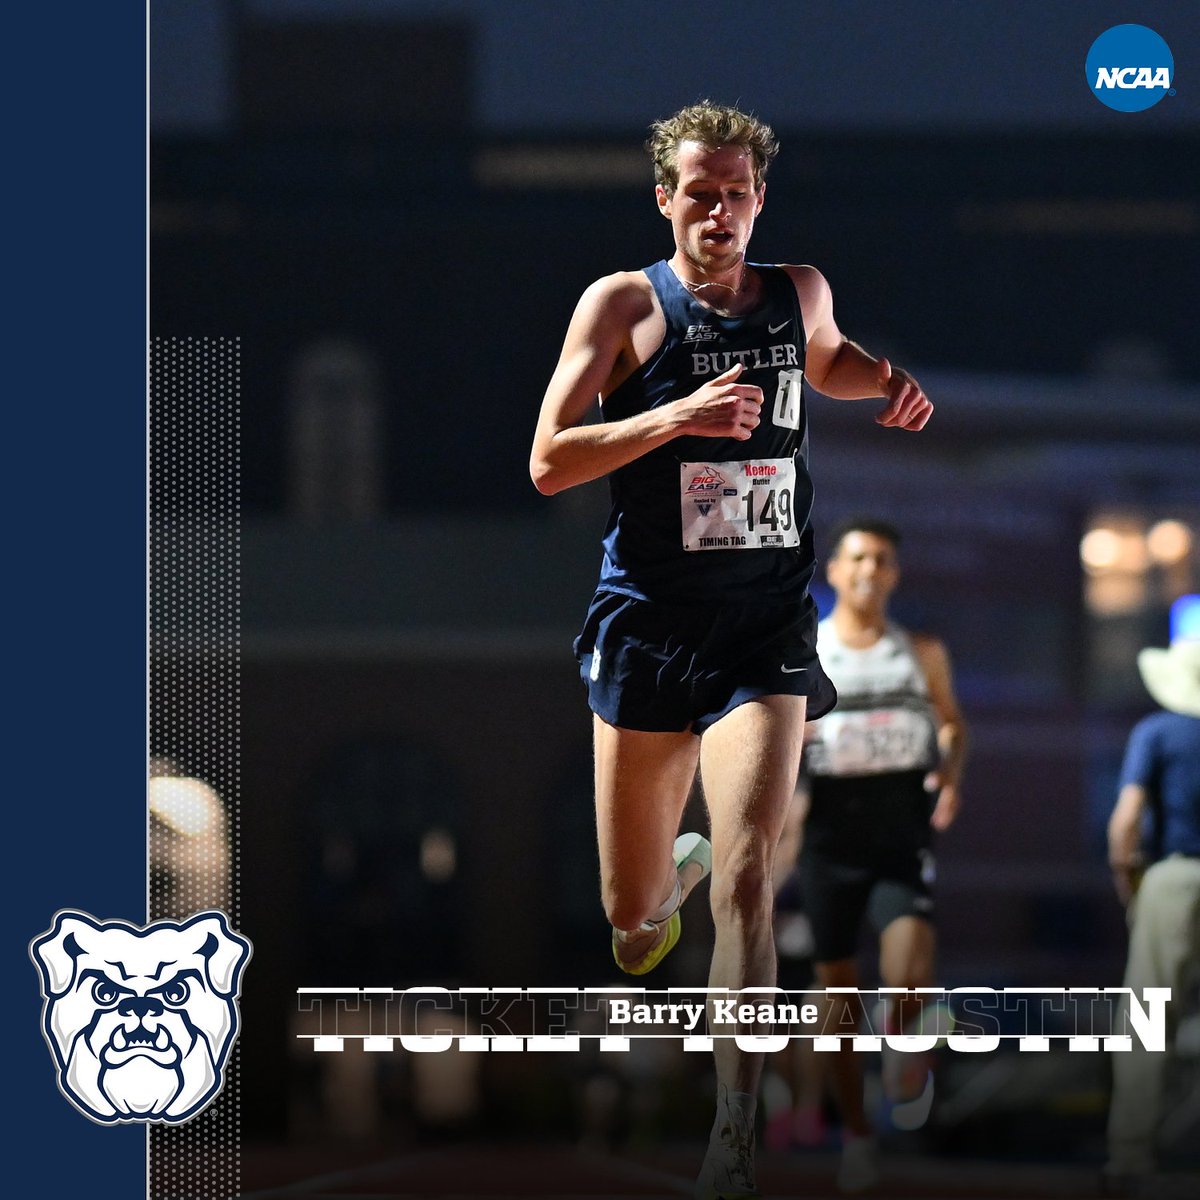 Barry Keane punches his ticket to Austin, Texas and the 2023 NCAA Championships. He finishes second in the 10k at the NCAA East First Round in a time of 28:57.59. #ButlerWay